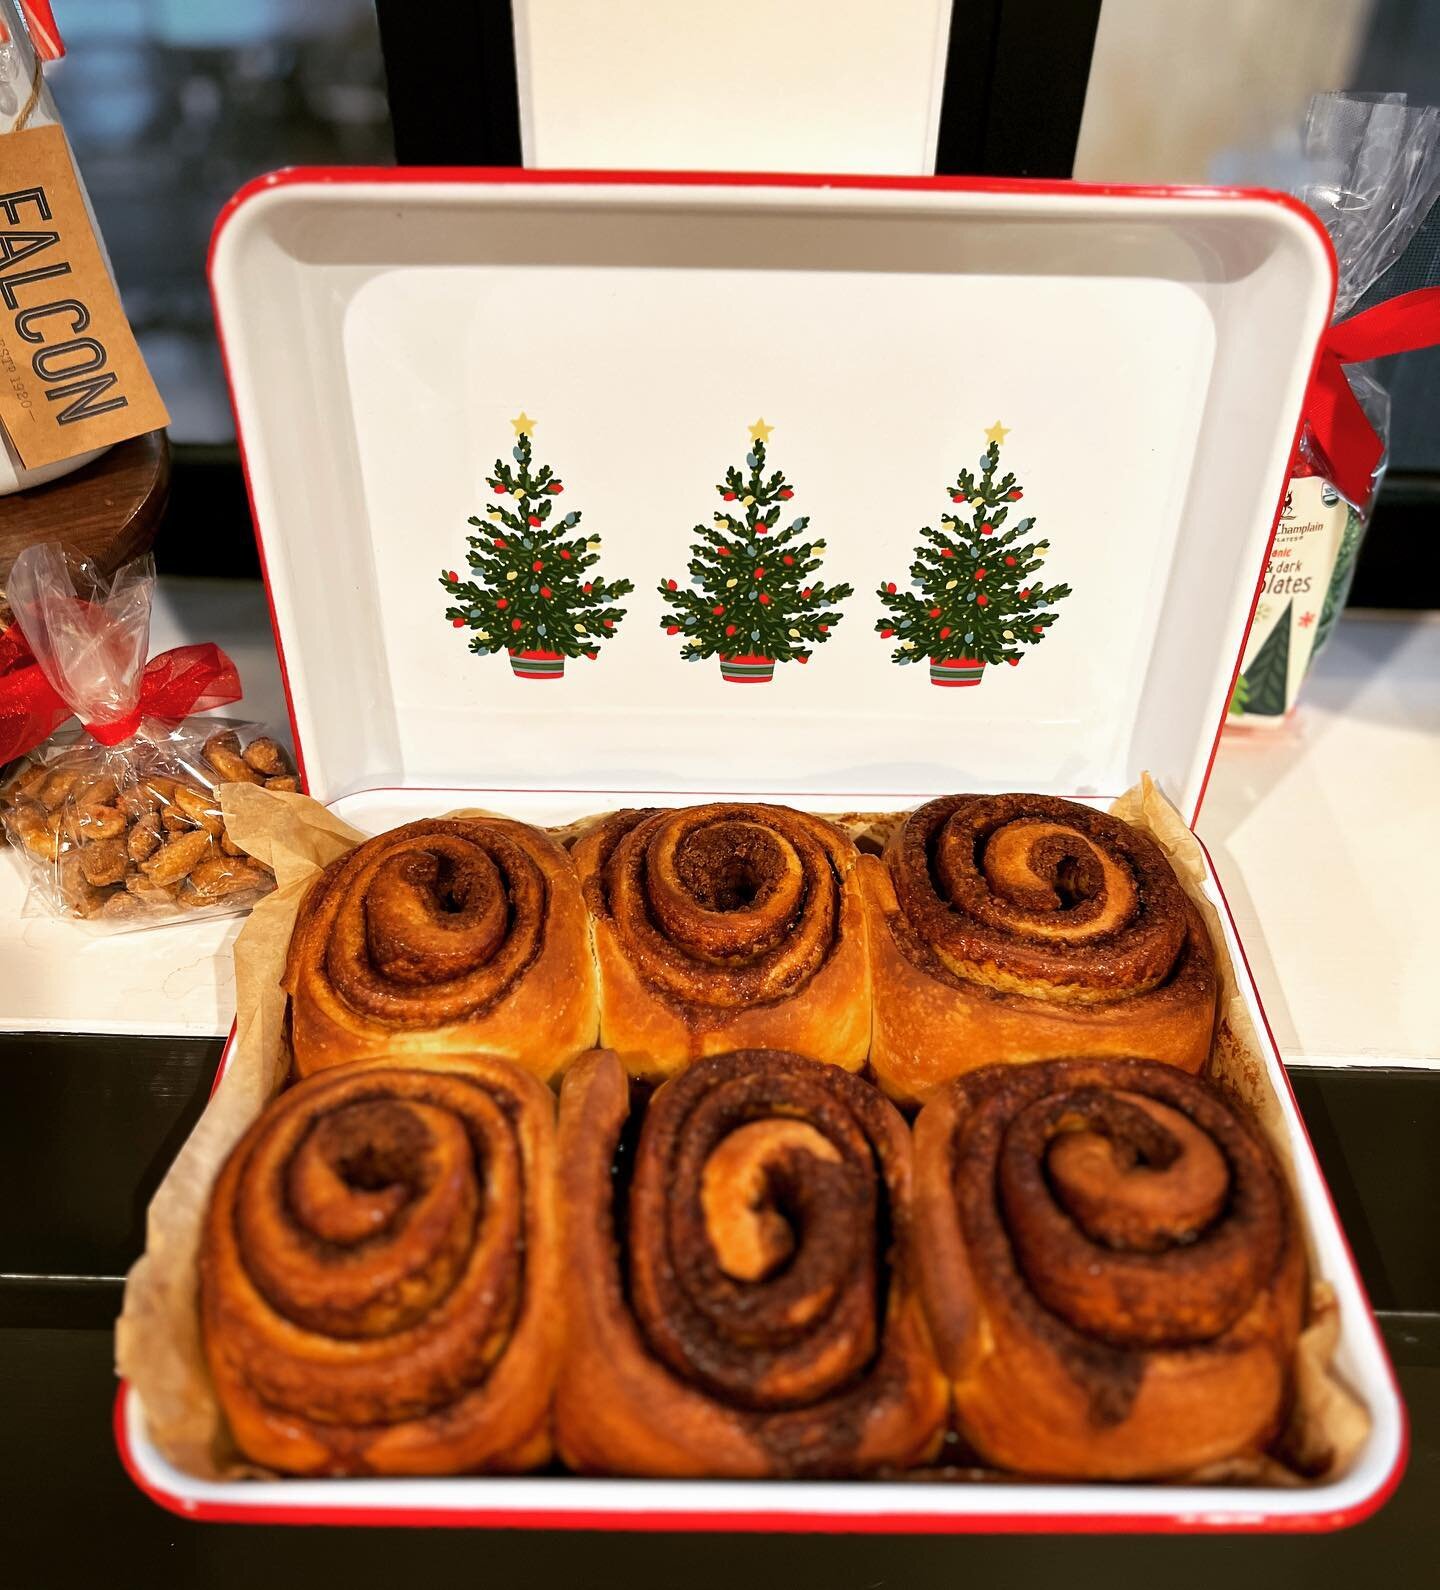 Available for Saturday preorders during December&hellip;. 6 Cinnamon Rolls in a Crow Canyon/Helmsie 9.5x11 Christmas Tray $50 Call in LK for details. Limited quantity available.  @crowcanyonhome @helmsiegoods #cinnamonrolls #warmspice #feelslikechris